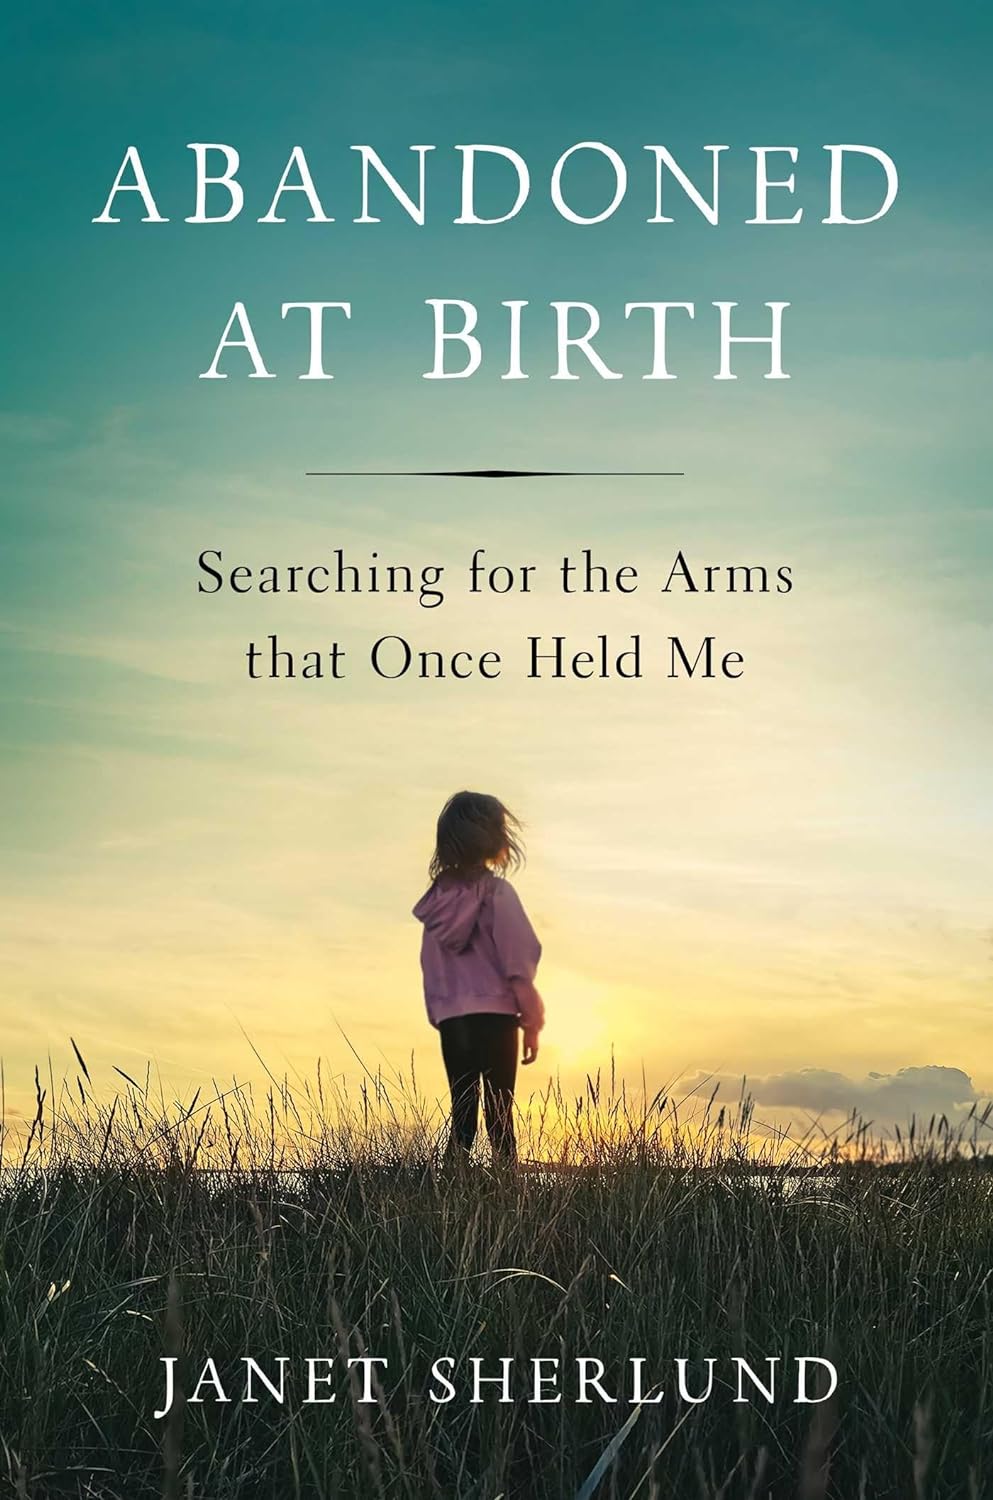 Abandoned at Birth by Janet Sherlund